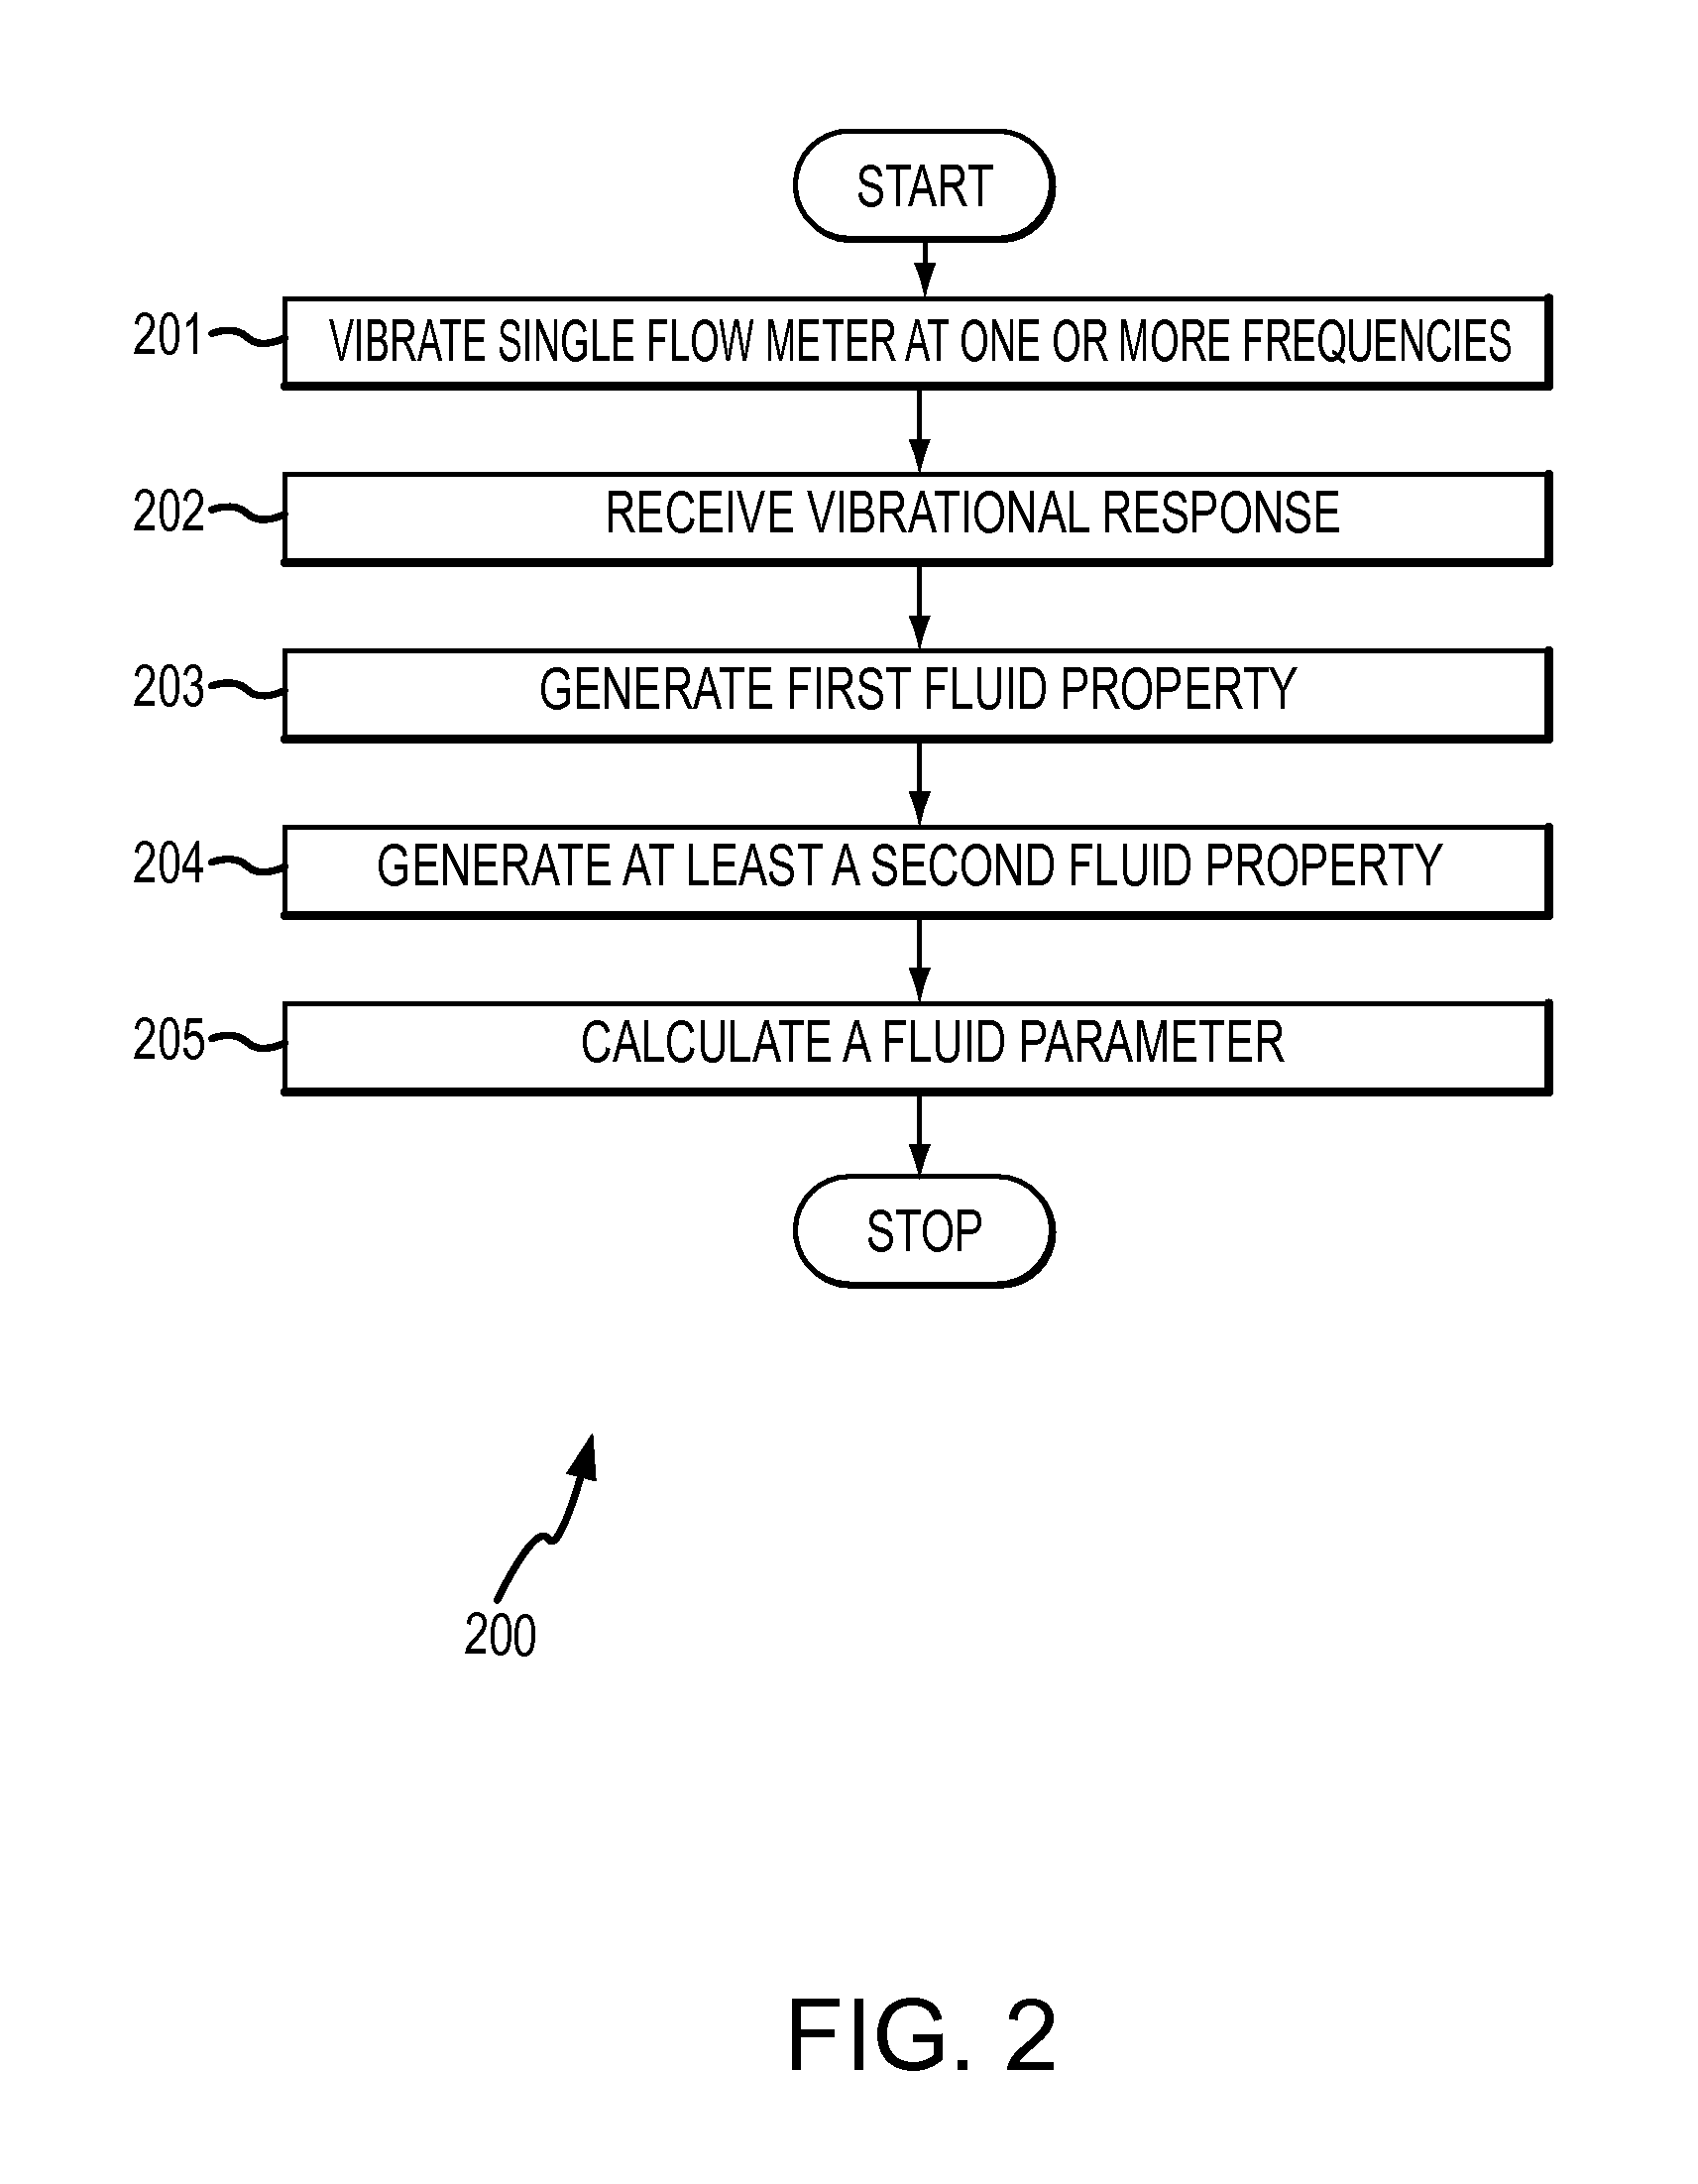 Method and apparatus for measuring a fluid parameter in a vibrating meter